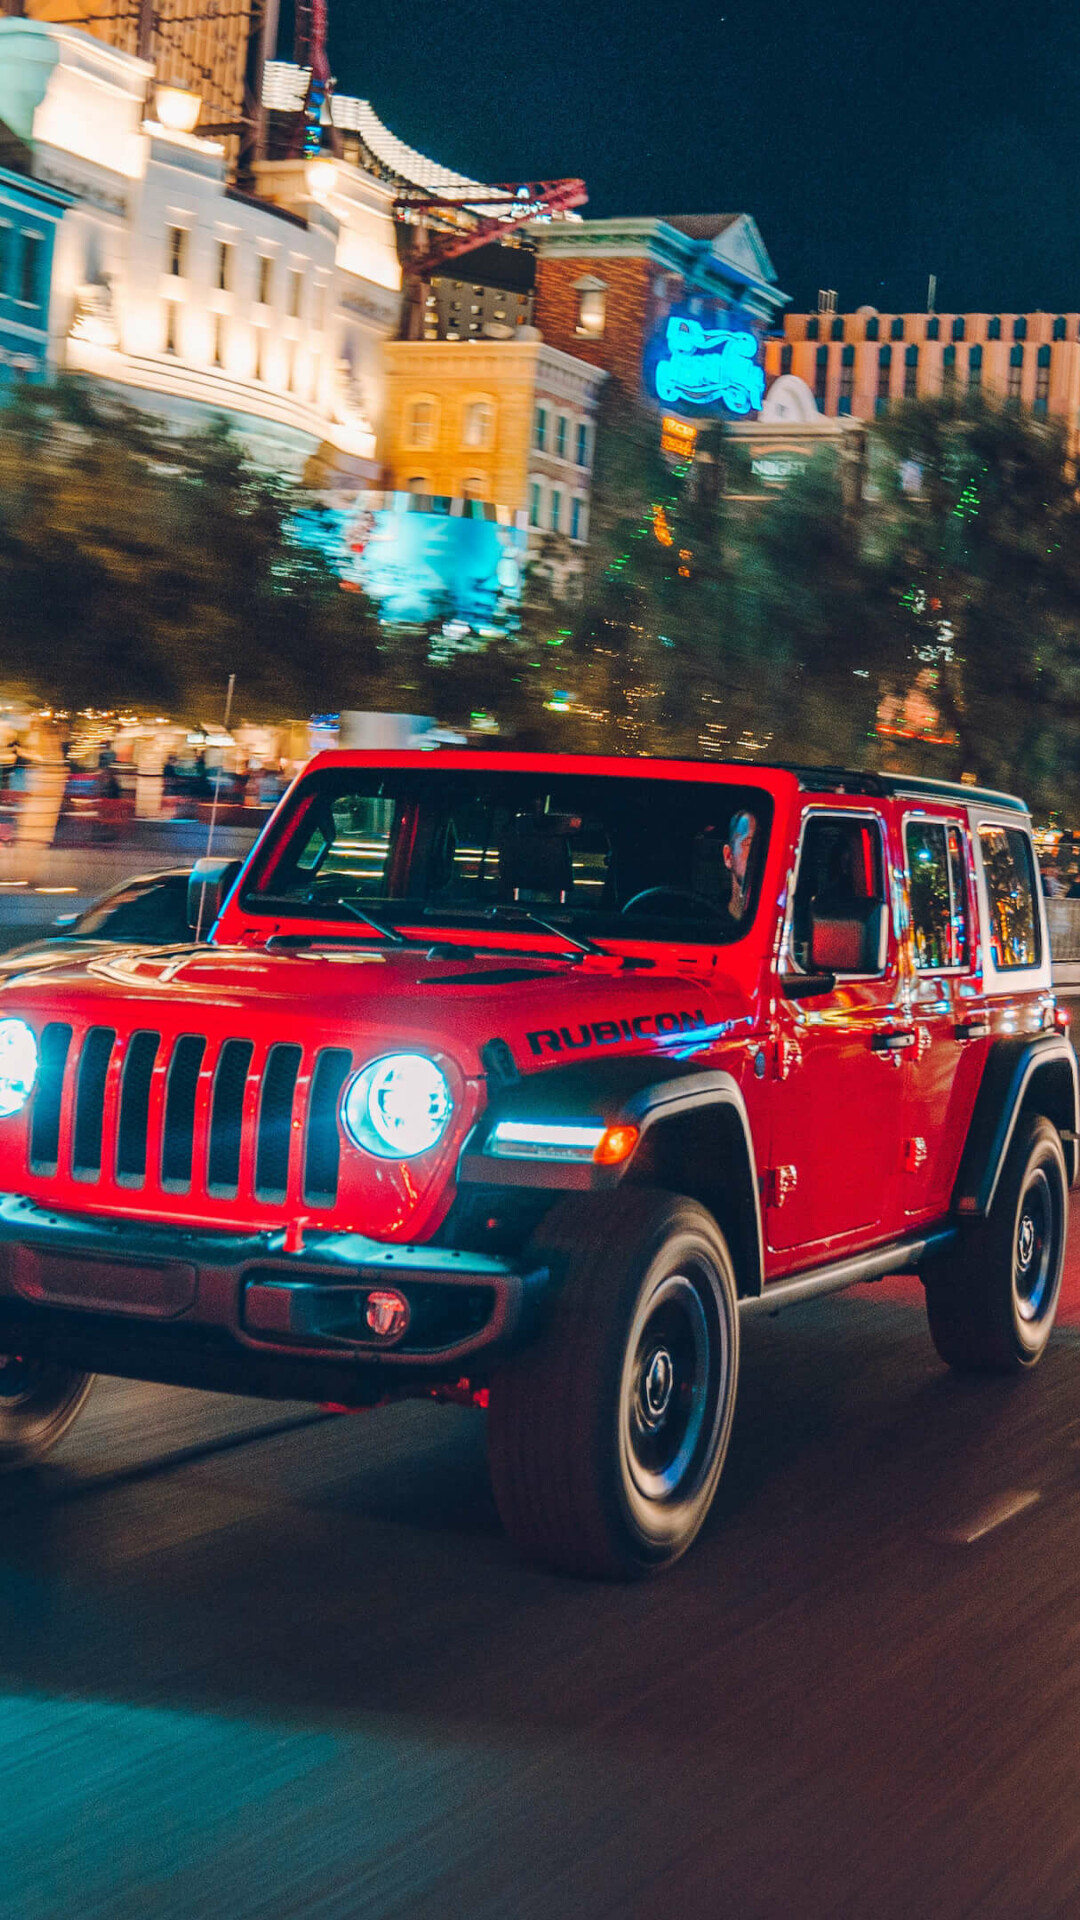 Jeep: The off-roader, Automotive lighting. 1080x1920 Full HD Wallpaper.